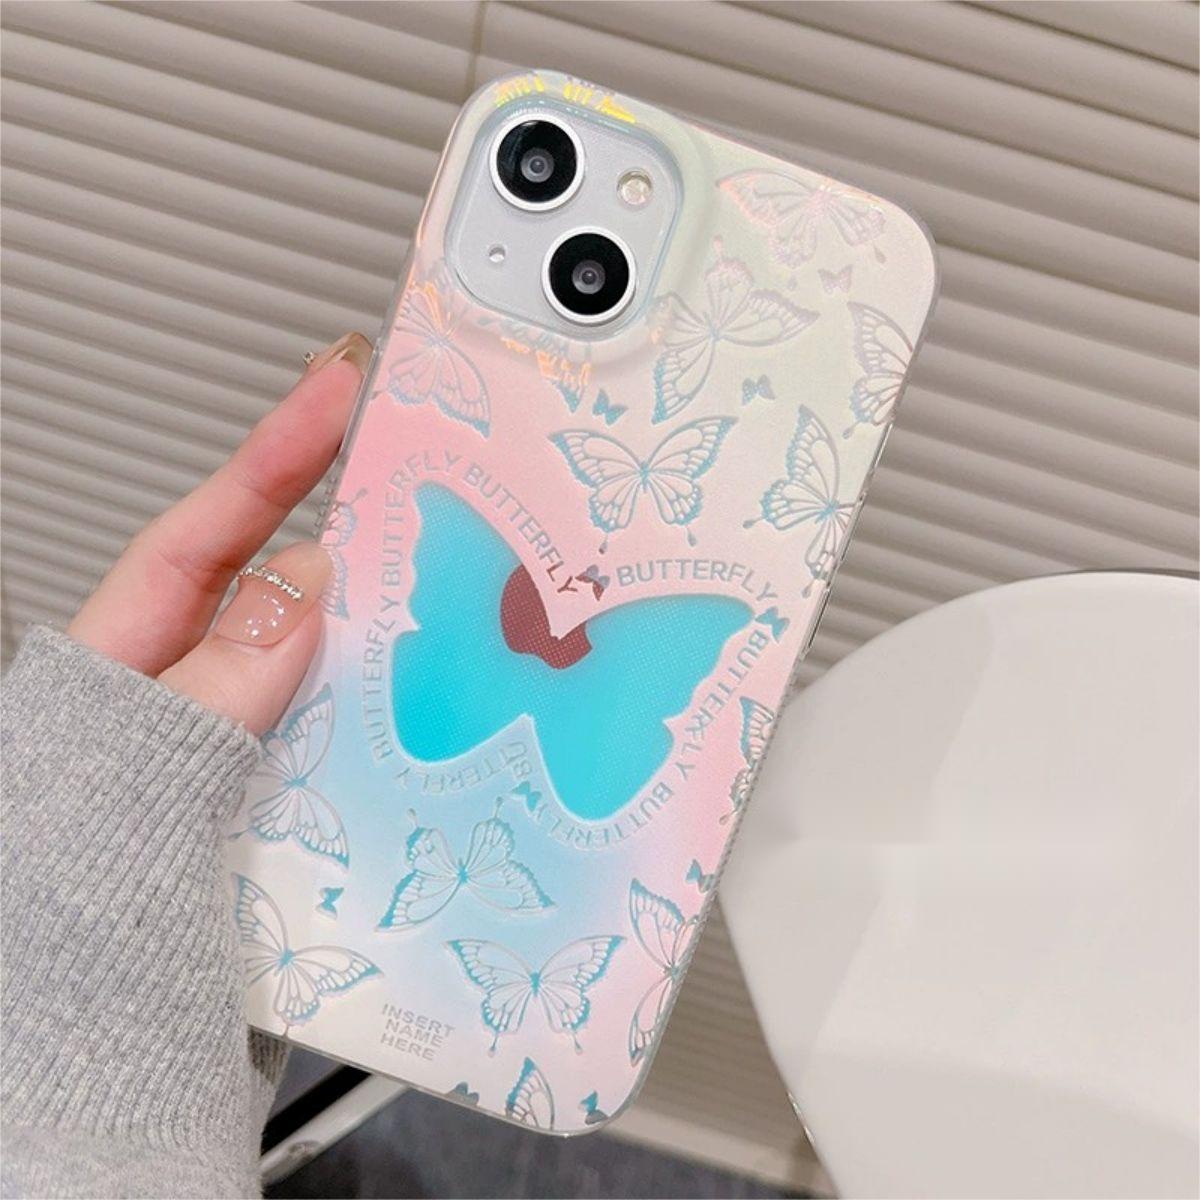 BBYOURS New Gradient Laser Butterfly phone case